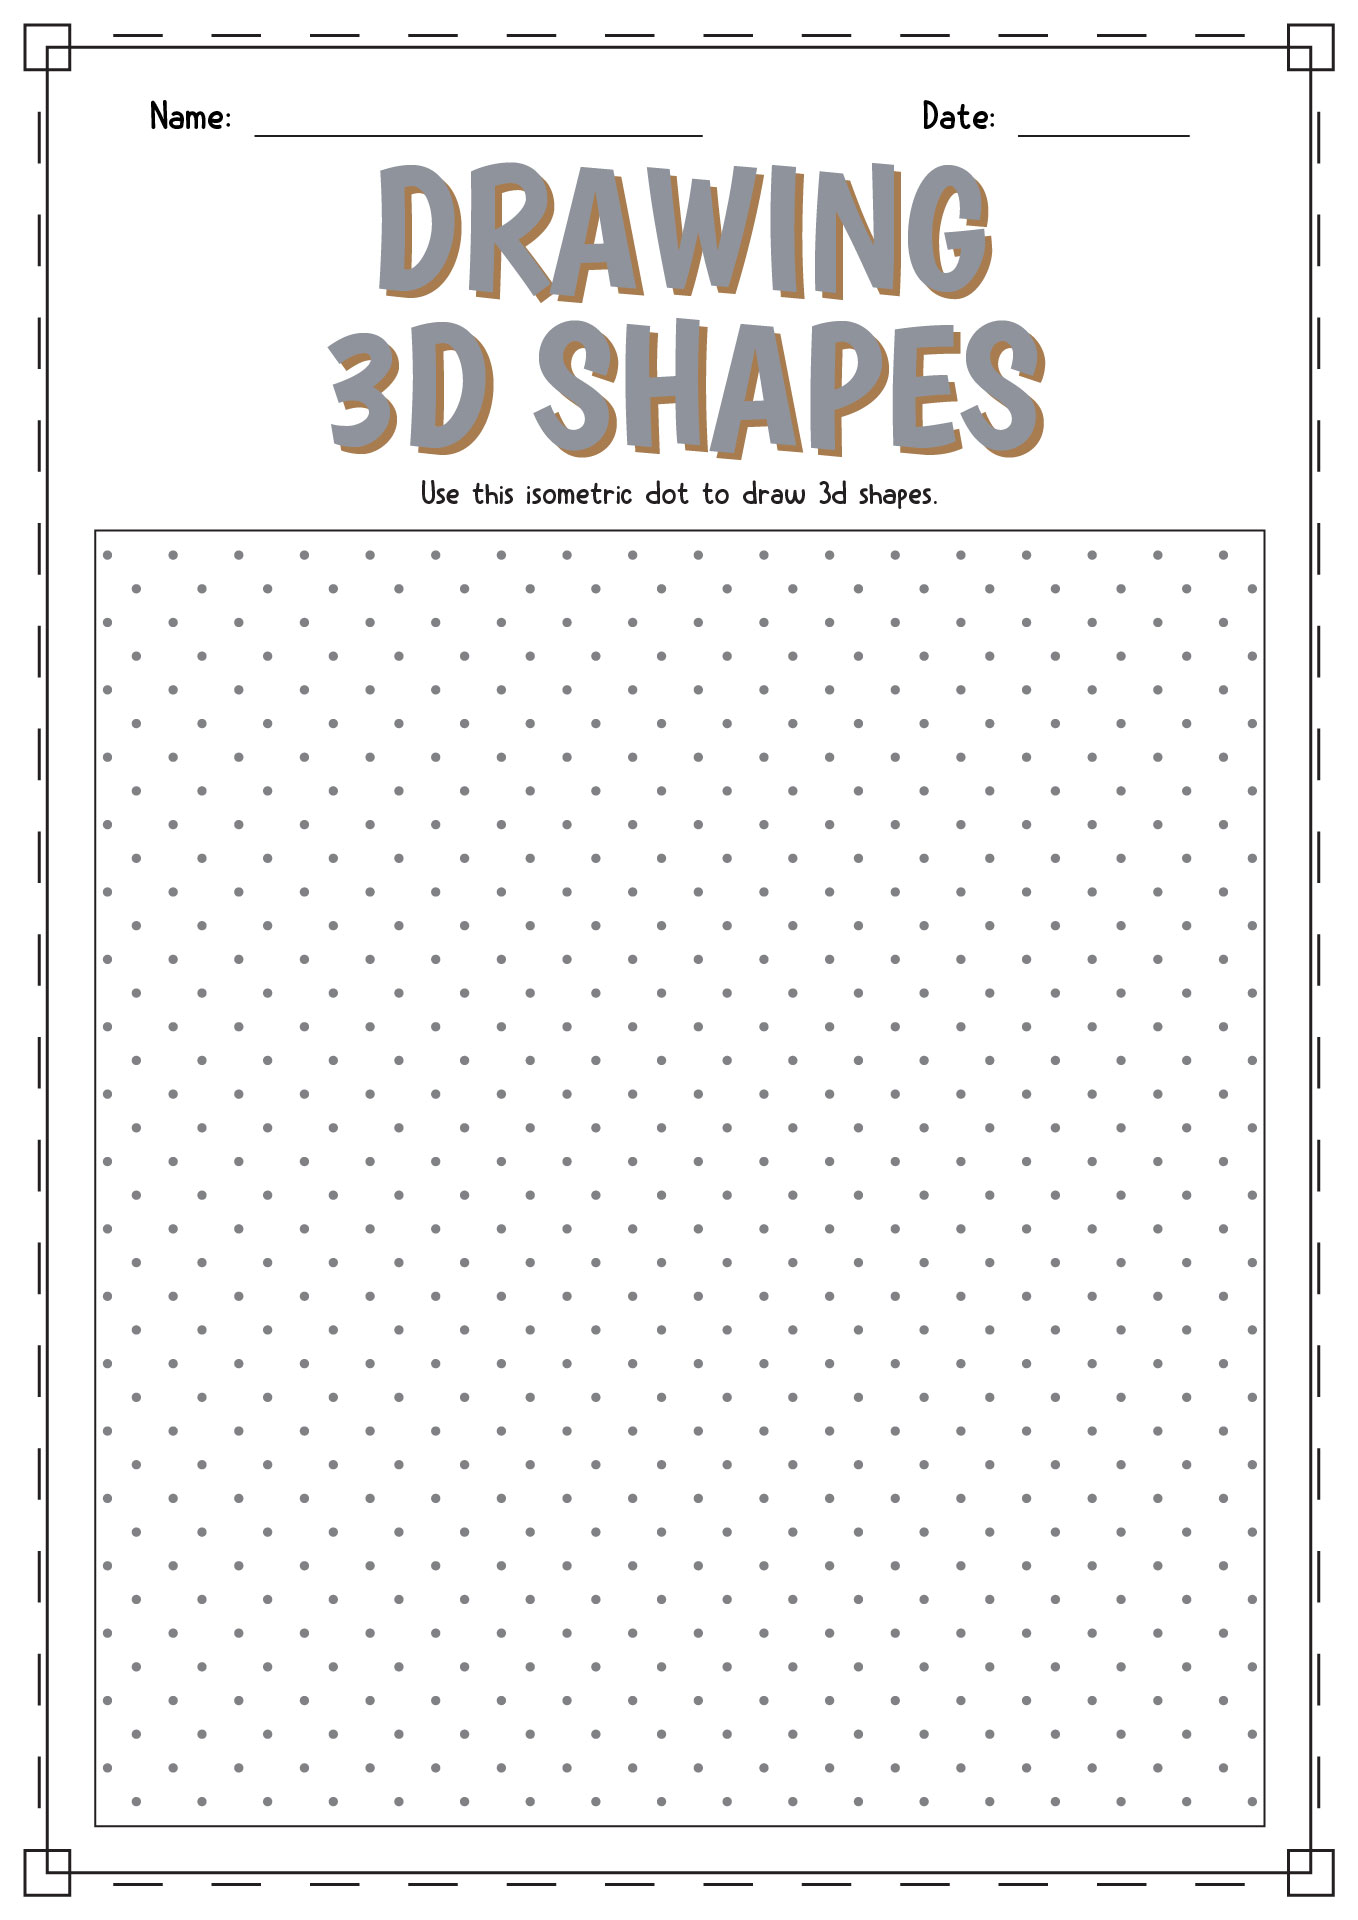 Drawing 3D Shapes On Isometric Dot Paper Image